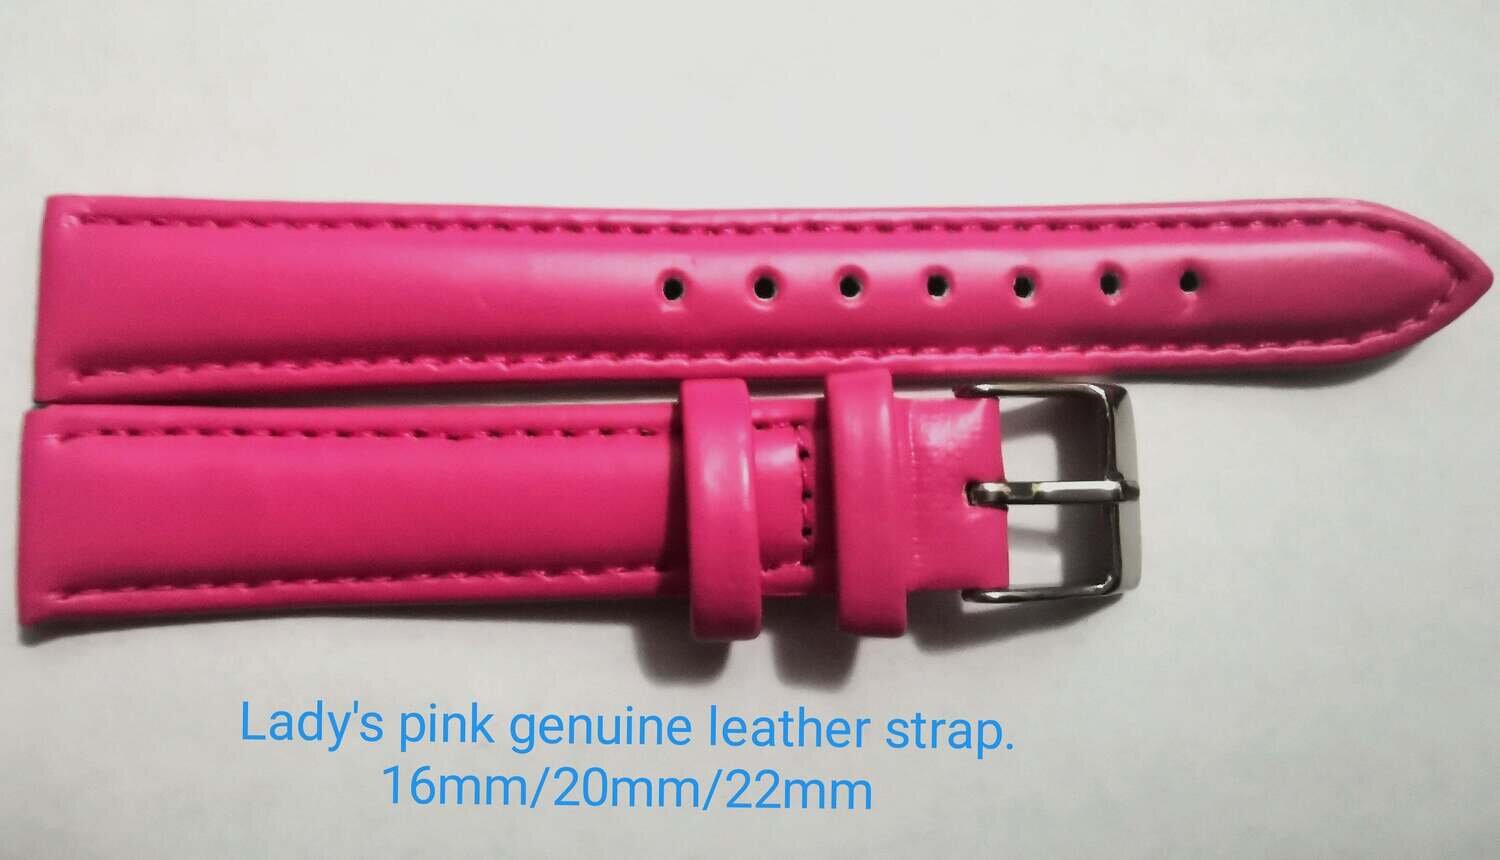 Lady's pink genuine leather strap 16mm/20mm/22mm